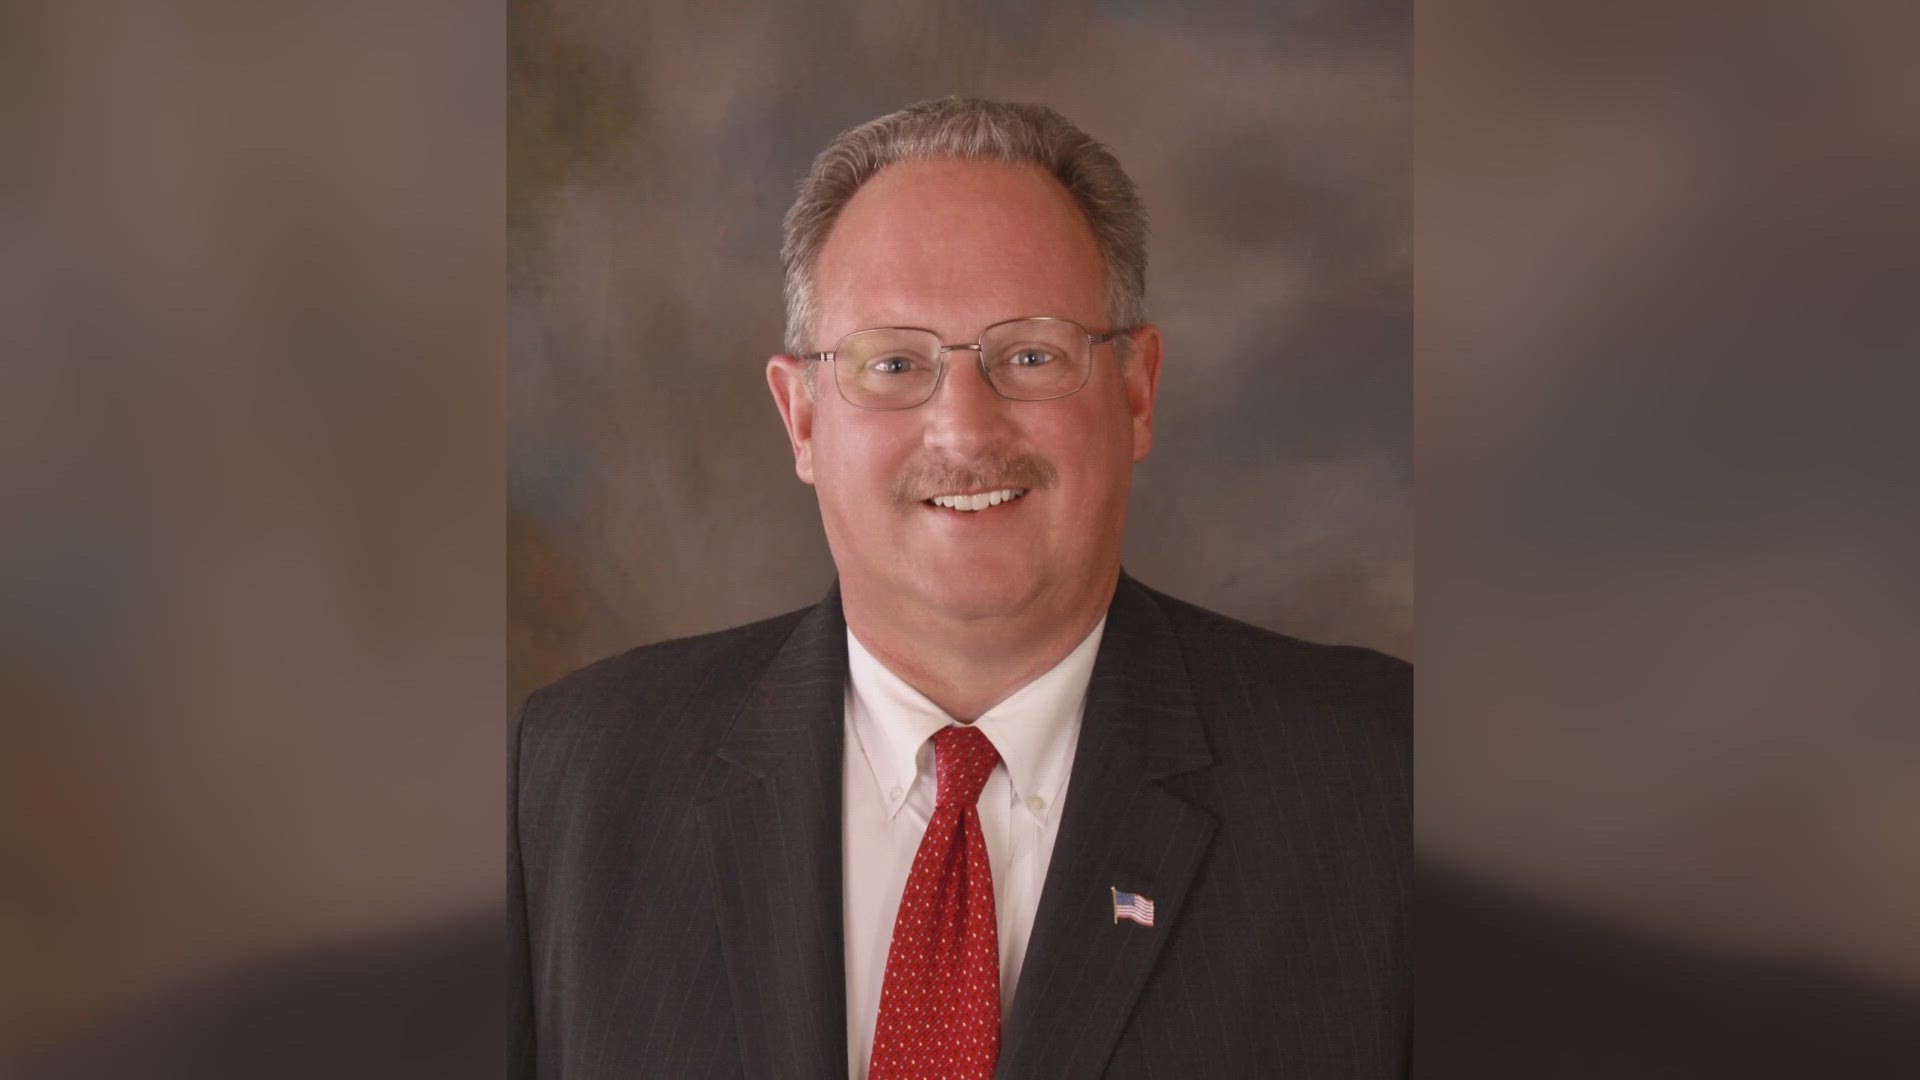 Mark Eckert was the second-longest-serving mayor in the history of Belleville, Illinois. He died Wednesday after a seven-month battle with cancer.